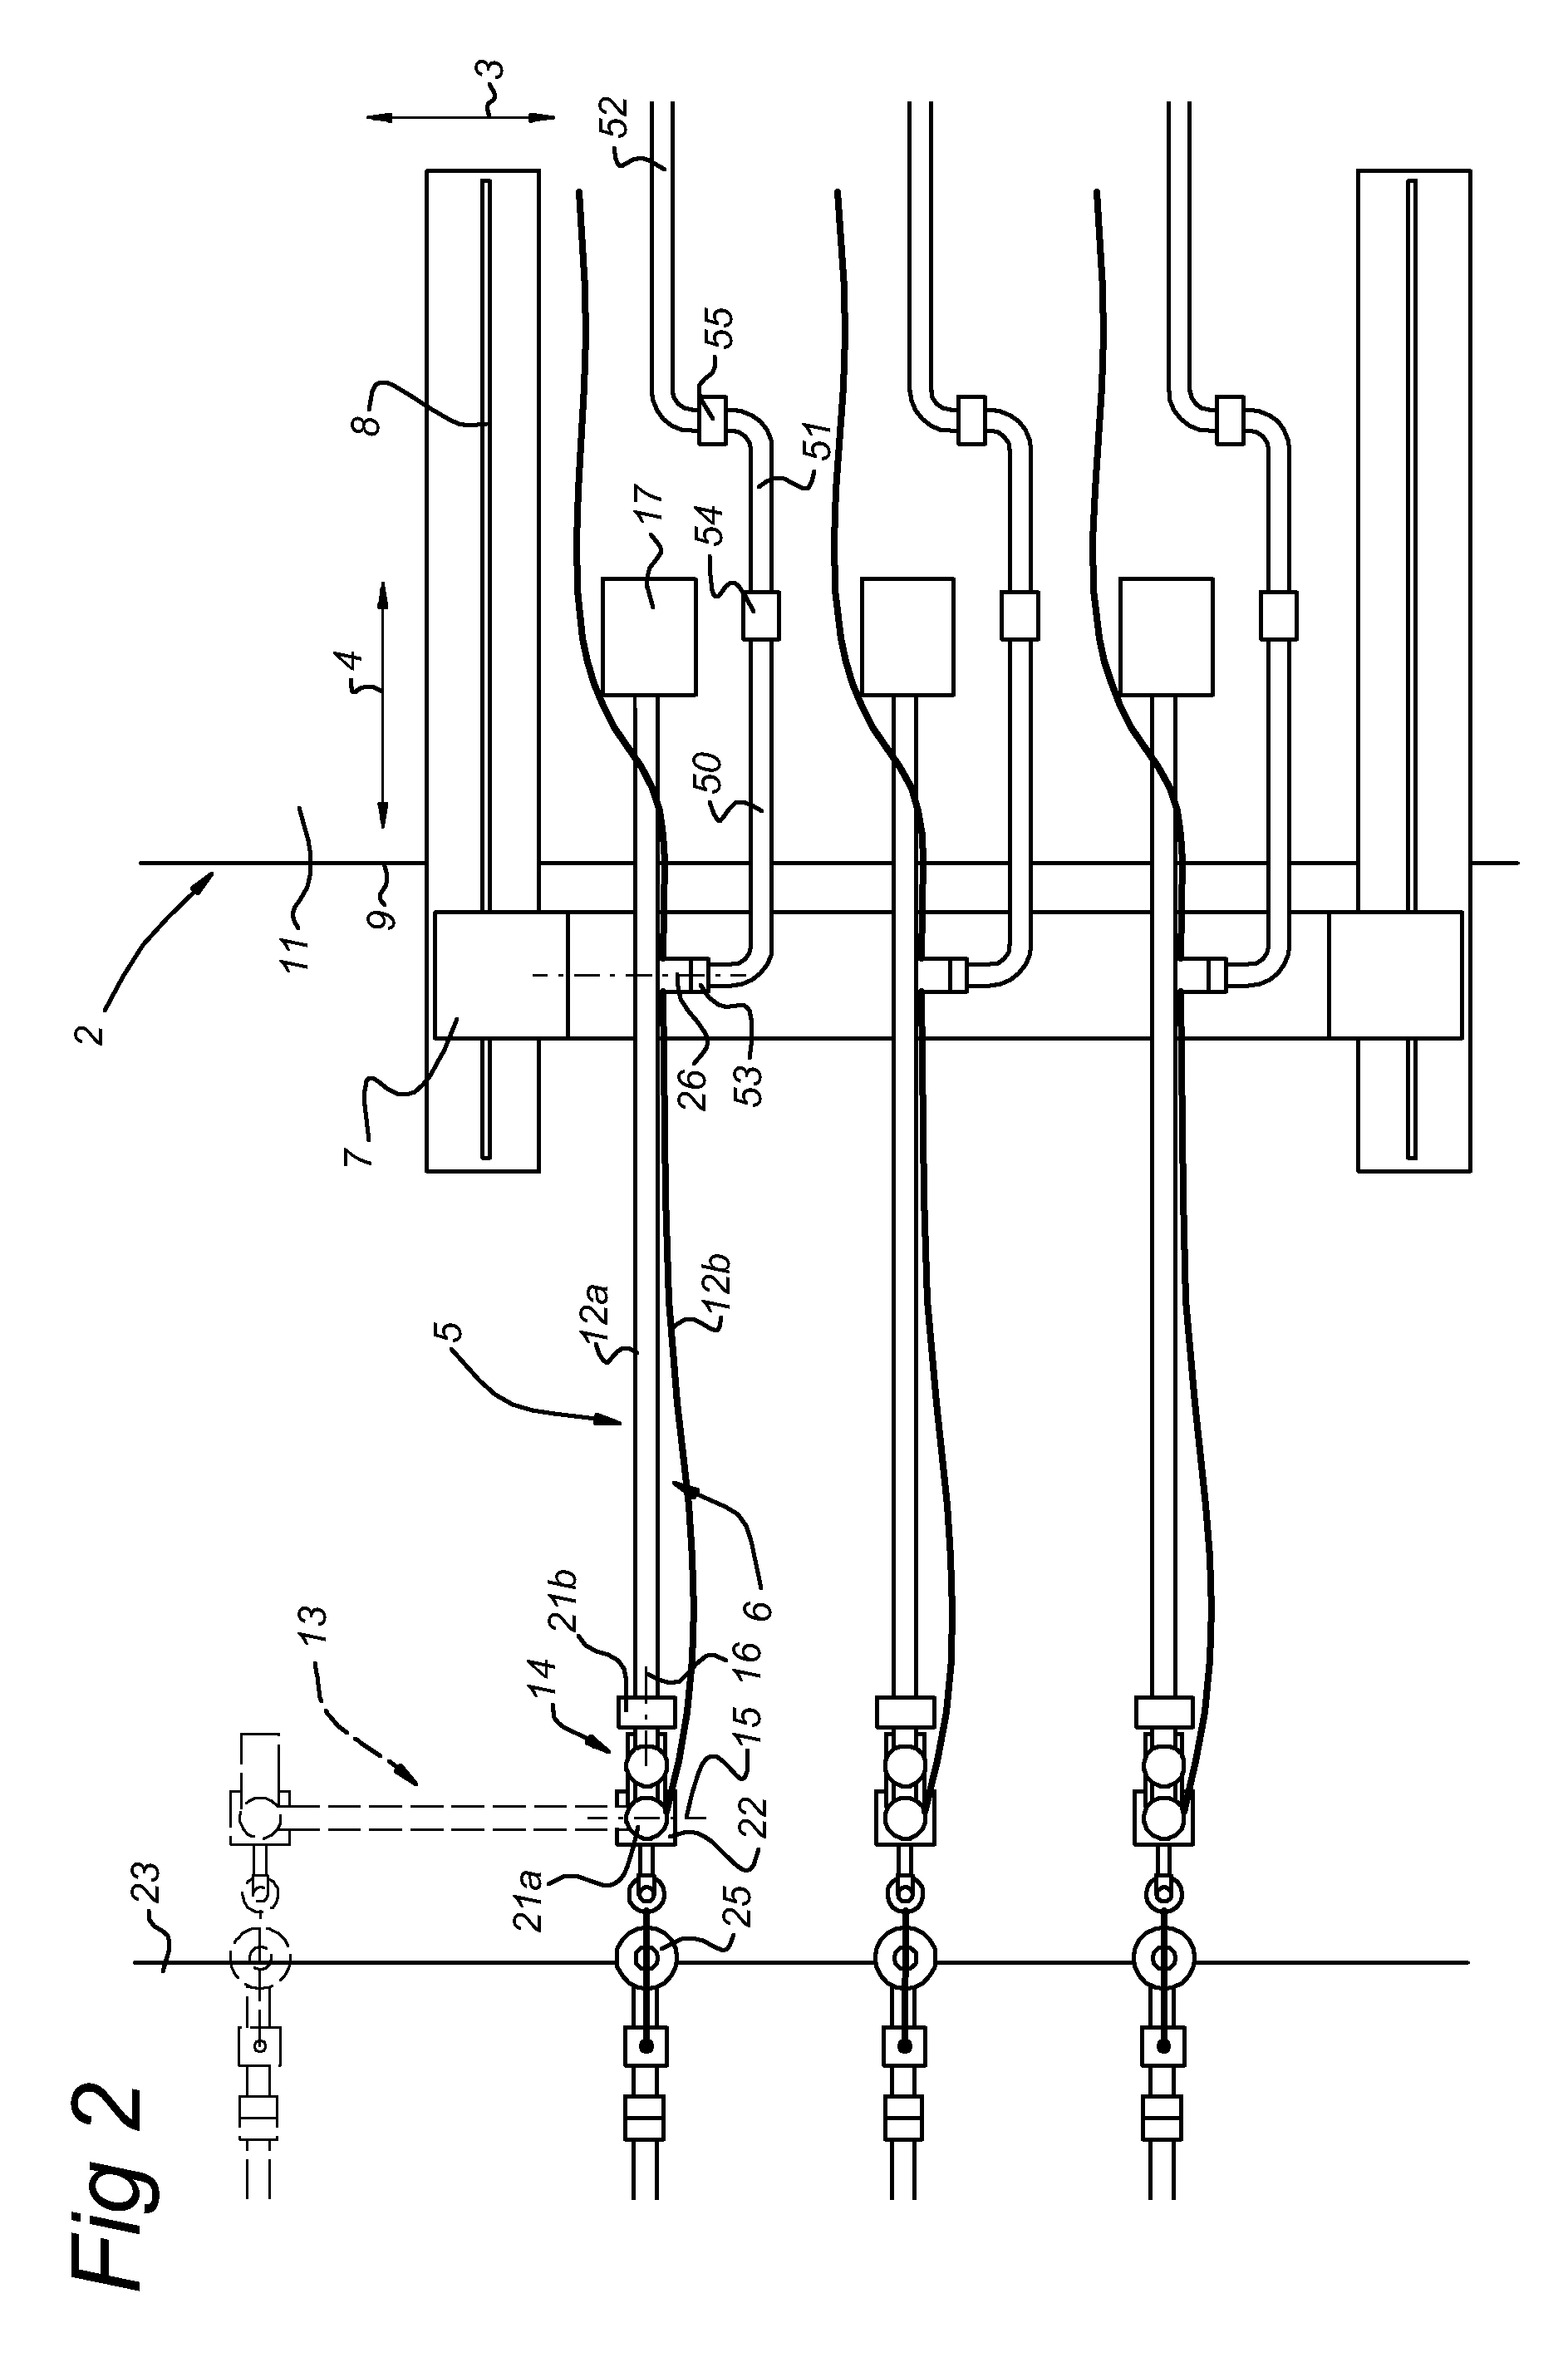 Hydrocarbon transfer system with horizontal displacement